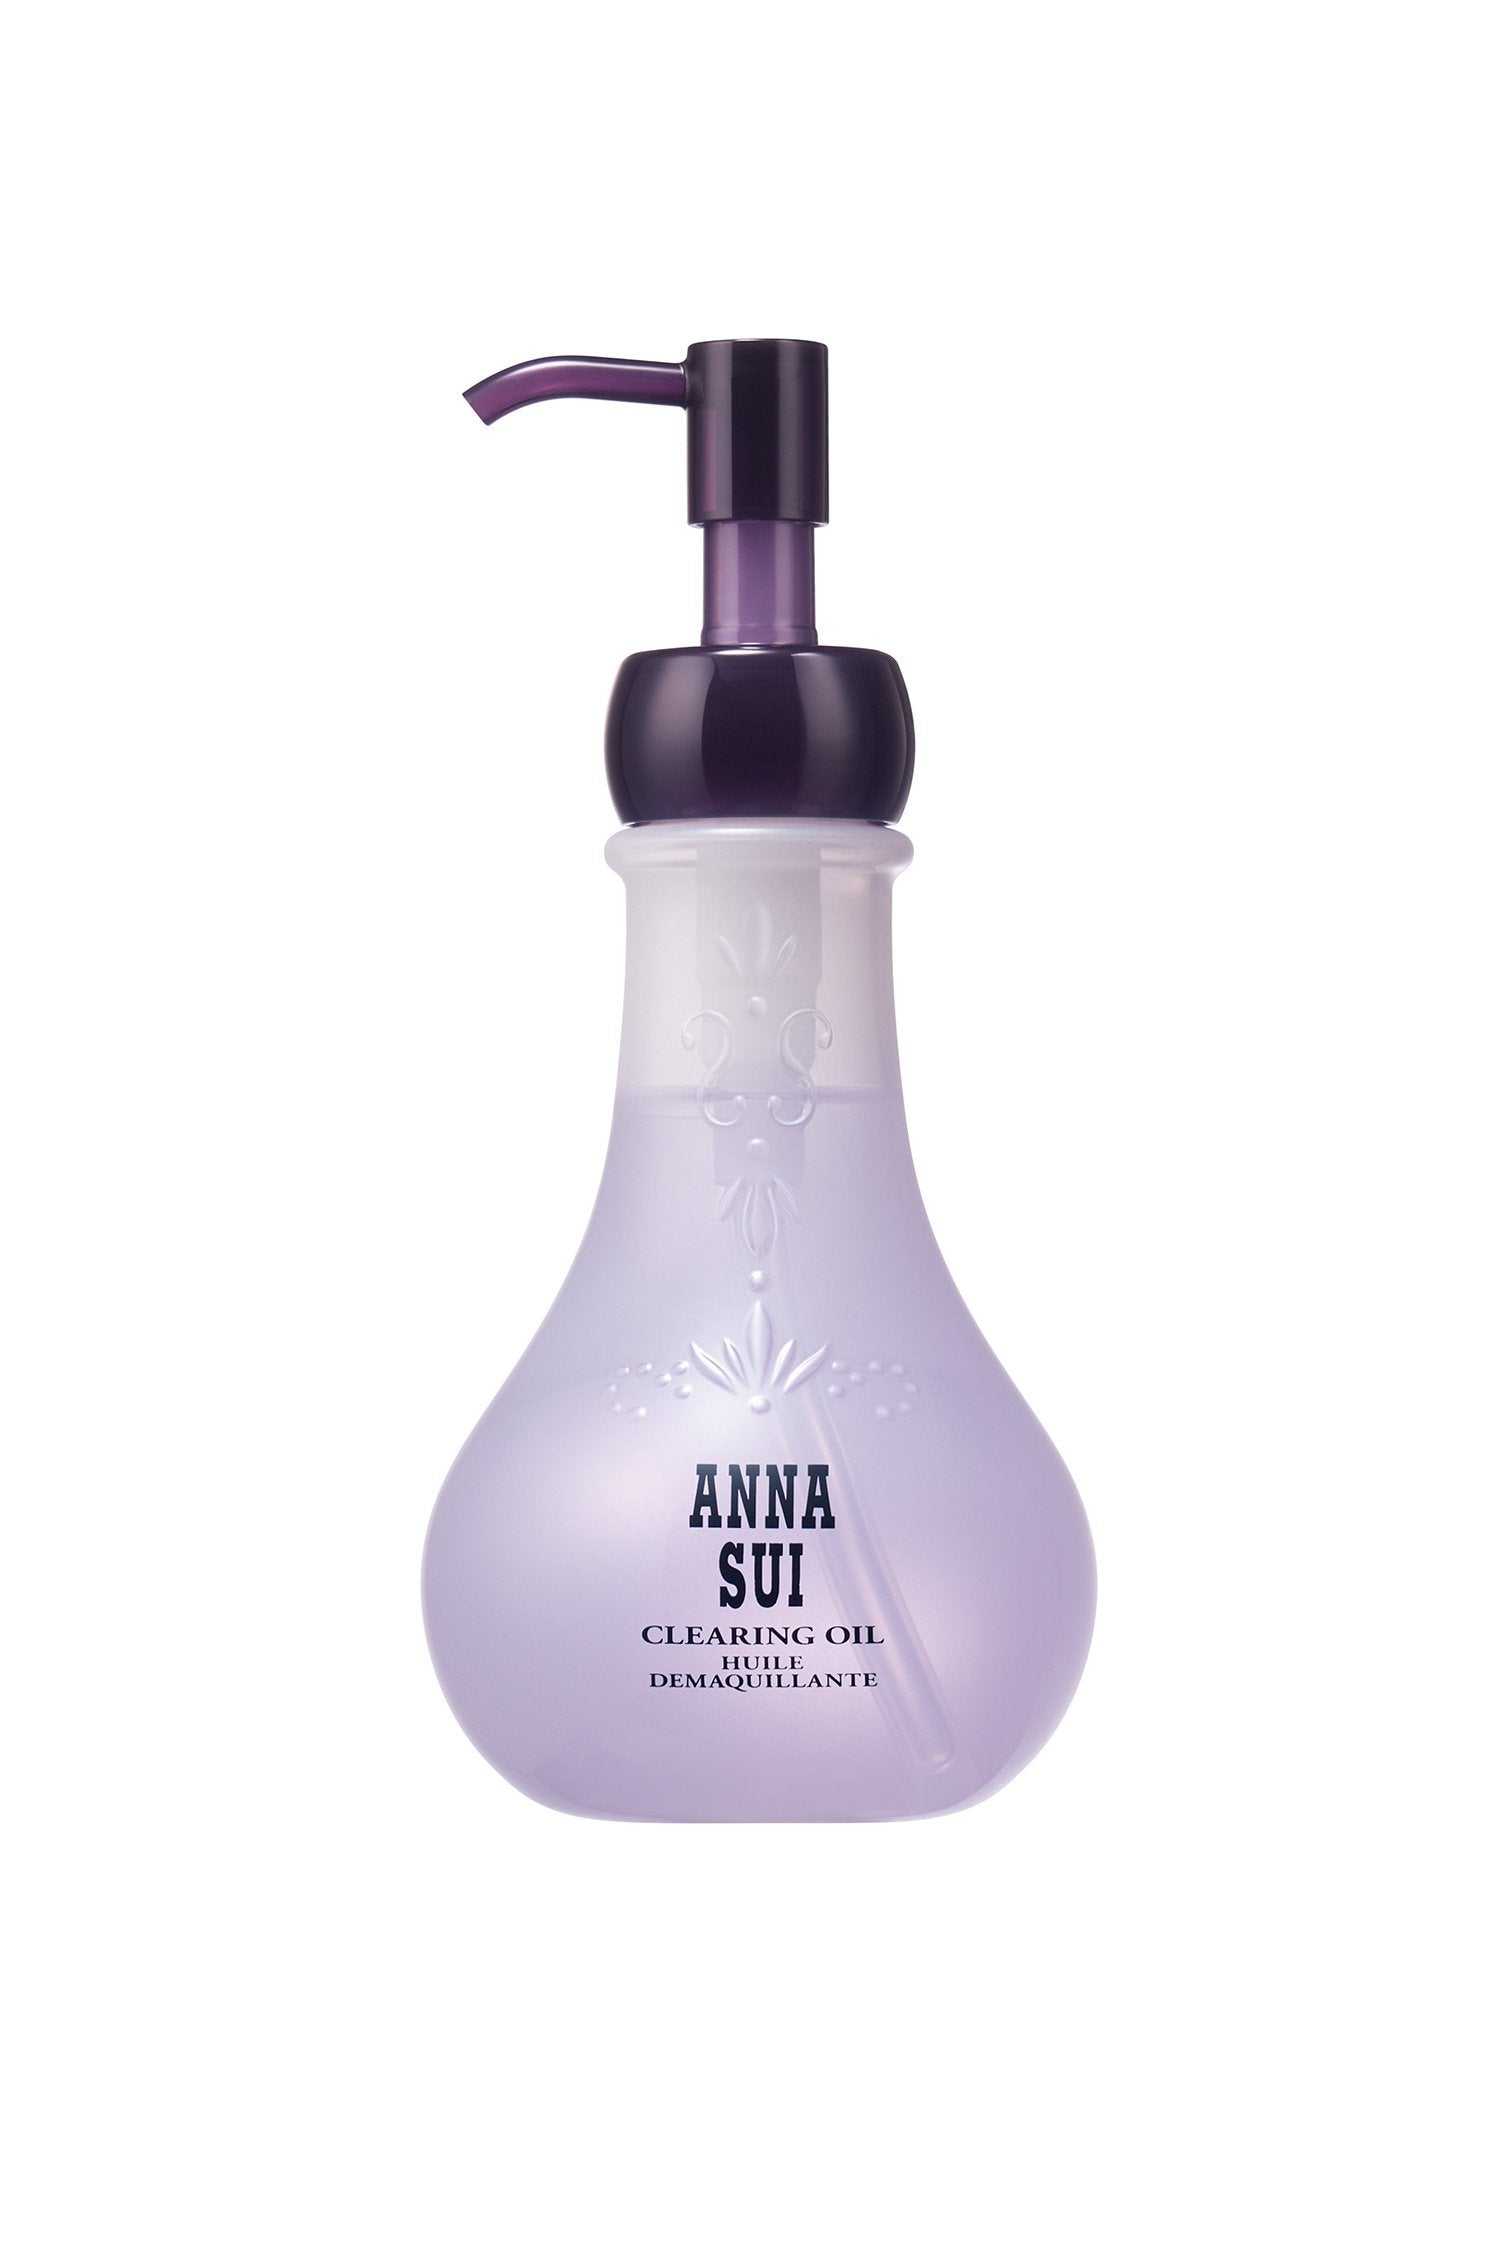 Clearing Oil: in a violet-white, bulb-shaped container, floral design and Anna branding, the dispenser is dark purple.